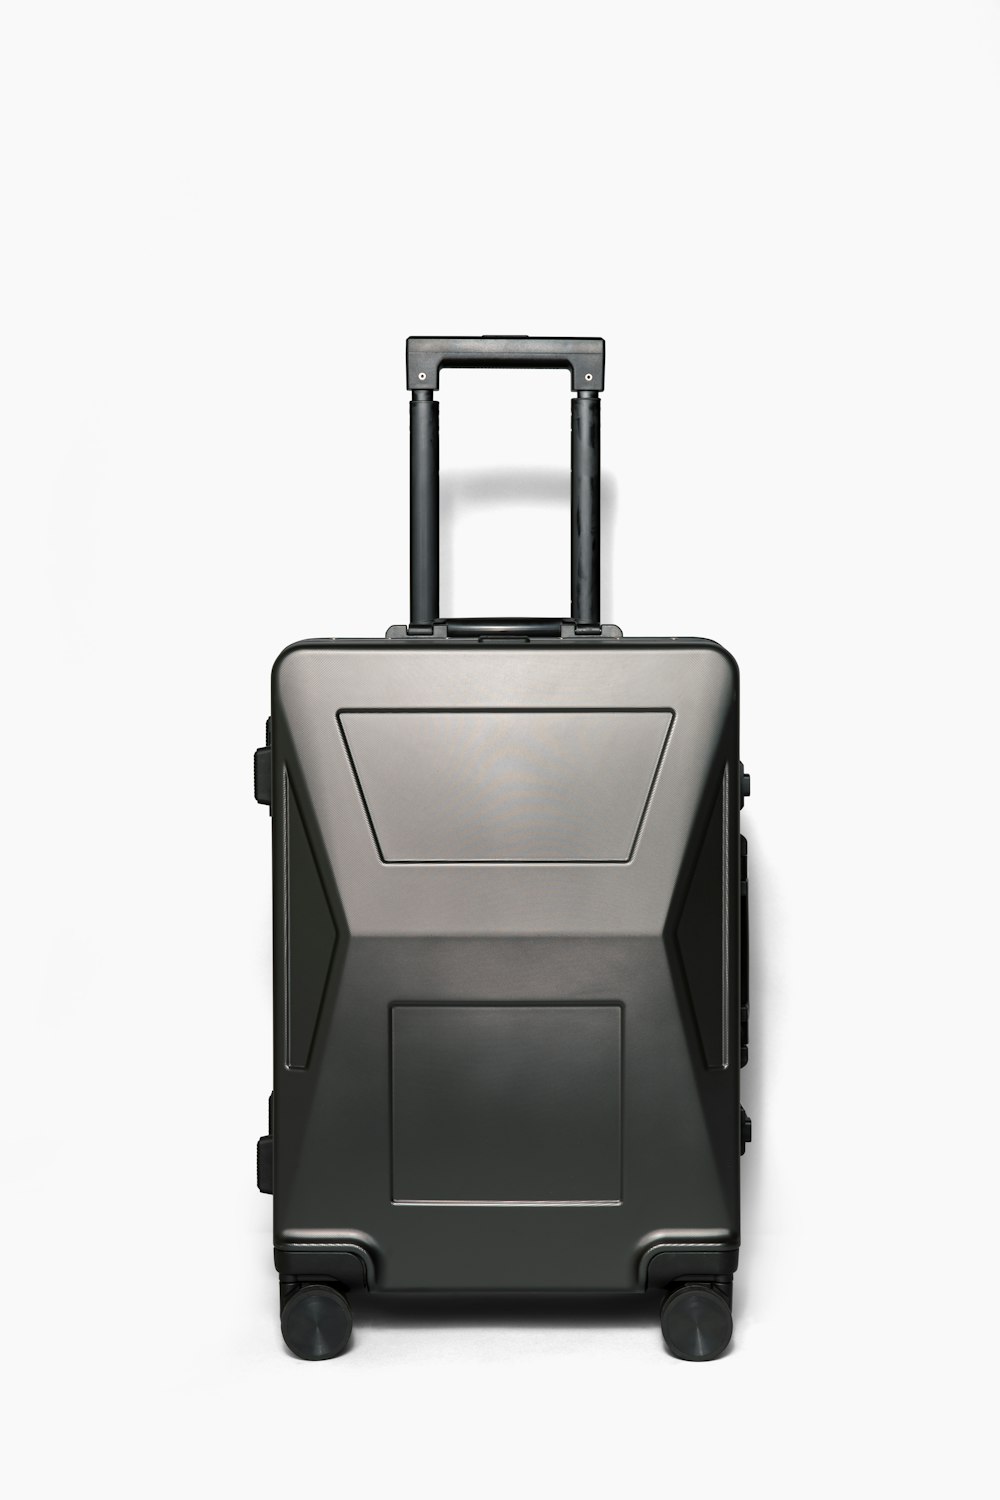 a piece of luggage that is on a white surface